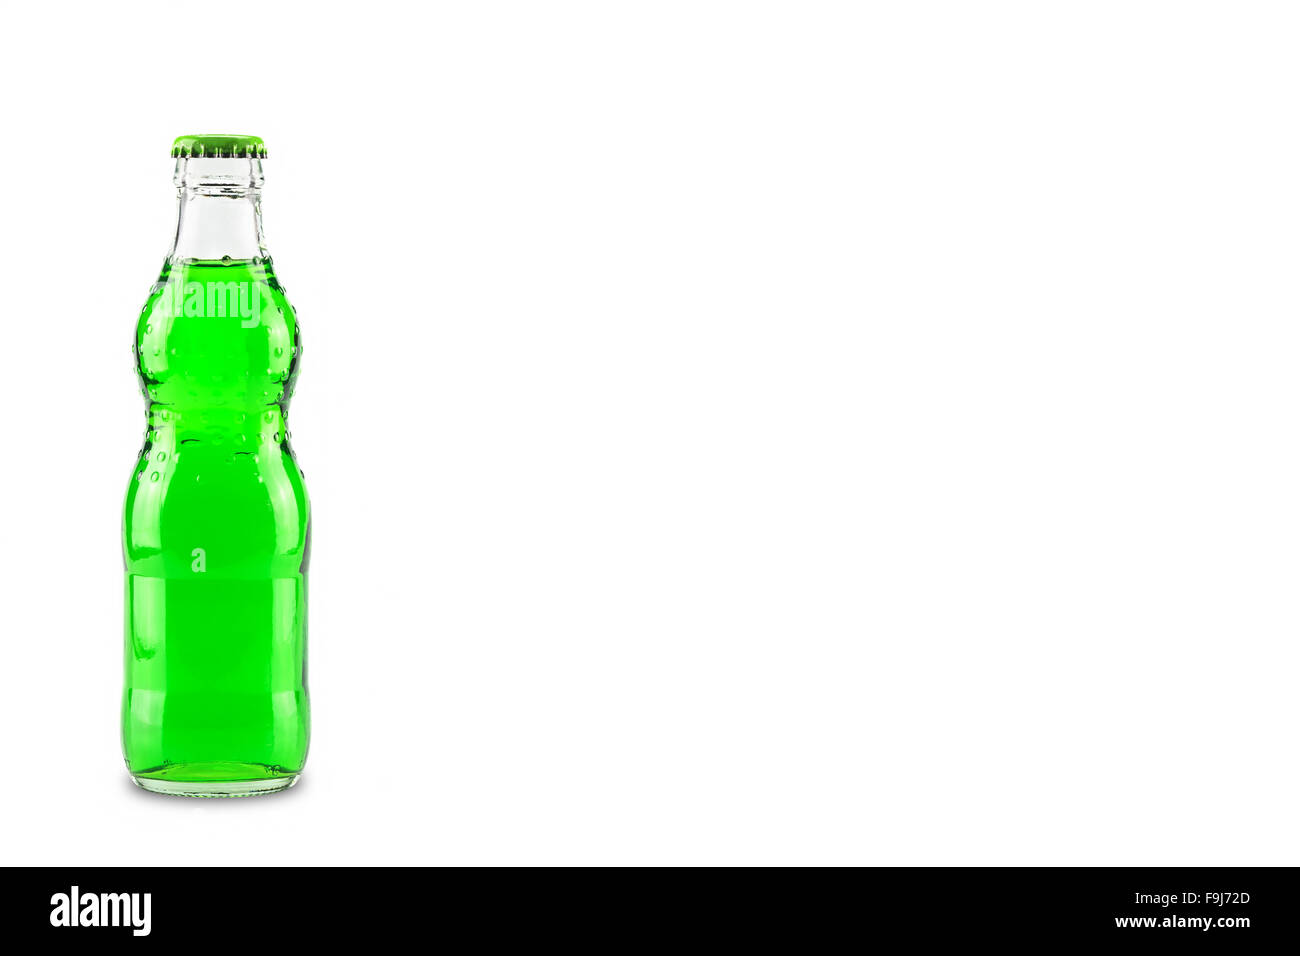 bottle of Green soda (coca cola) glass soda isolated on a white background Stock Photo